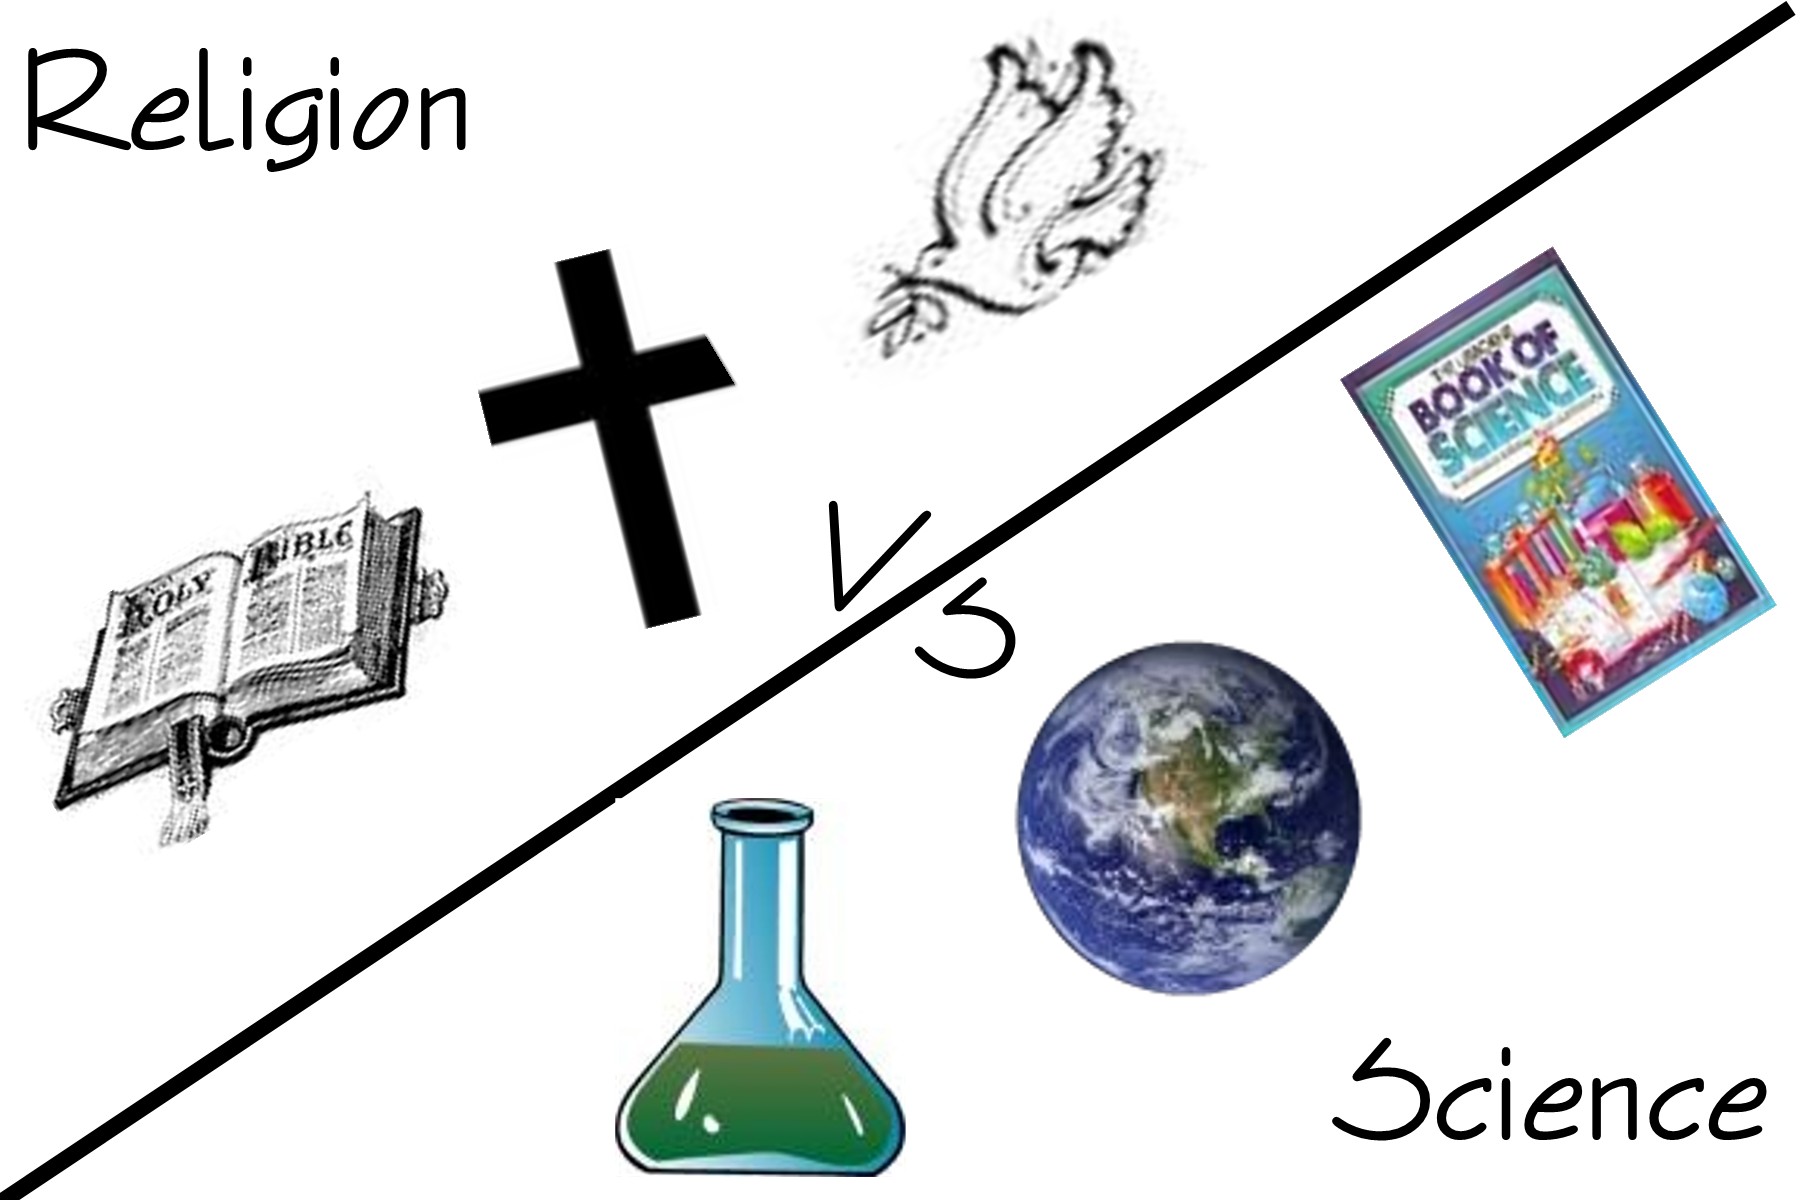 Religion and science essay